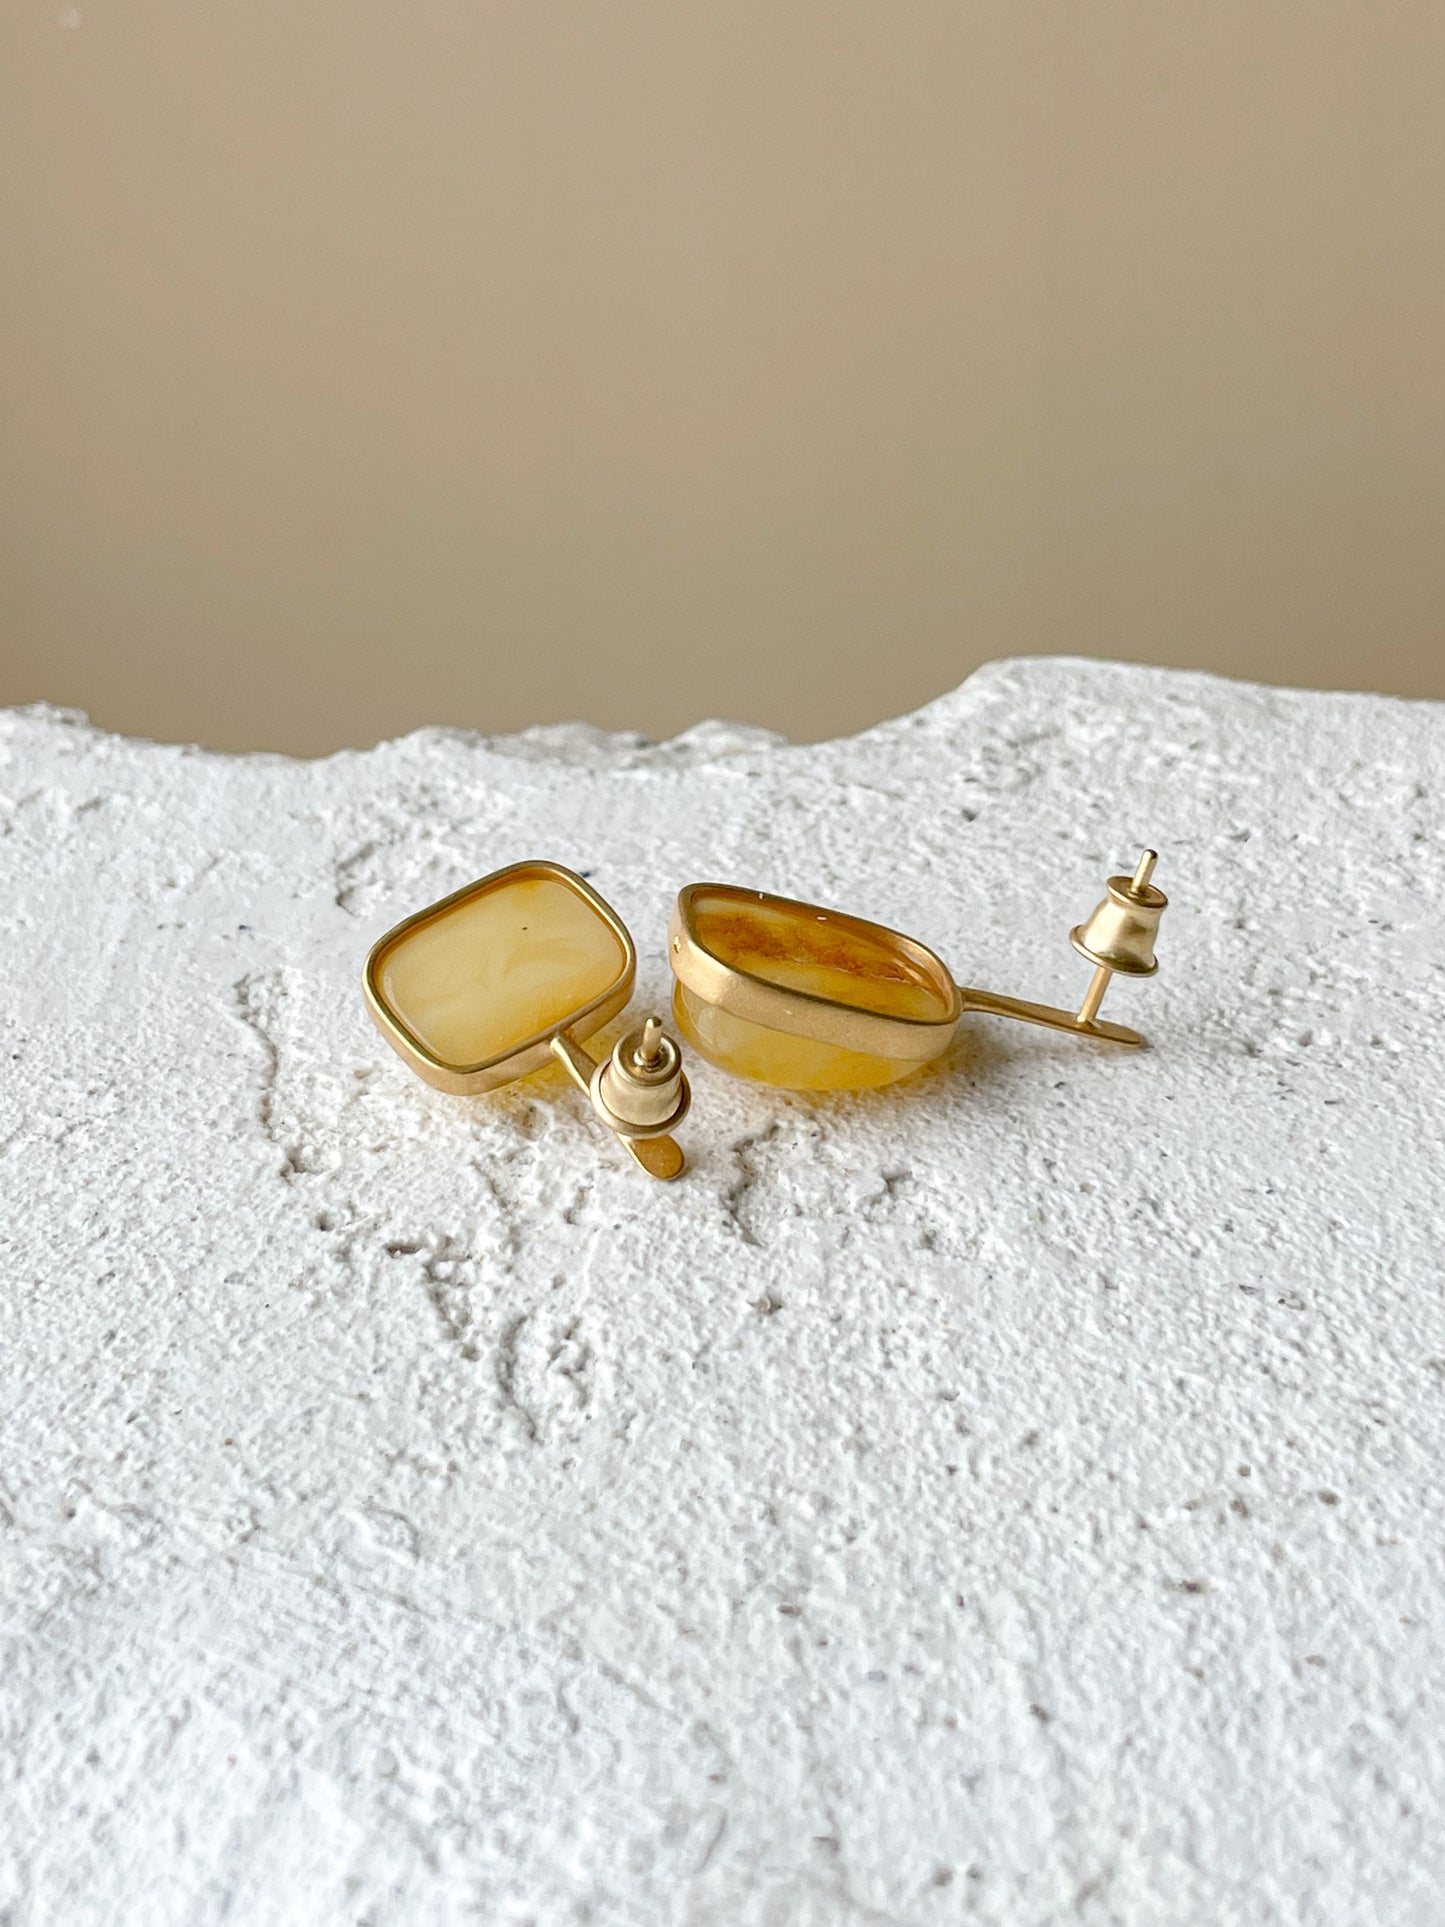 Honey amber stud earrings - Gold plated silver - Mismatched earrings collection